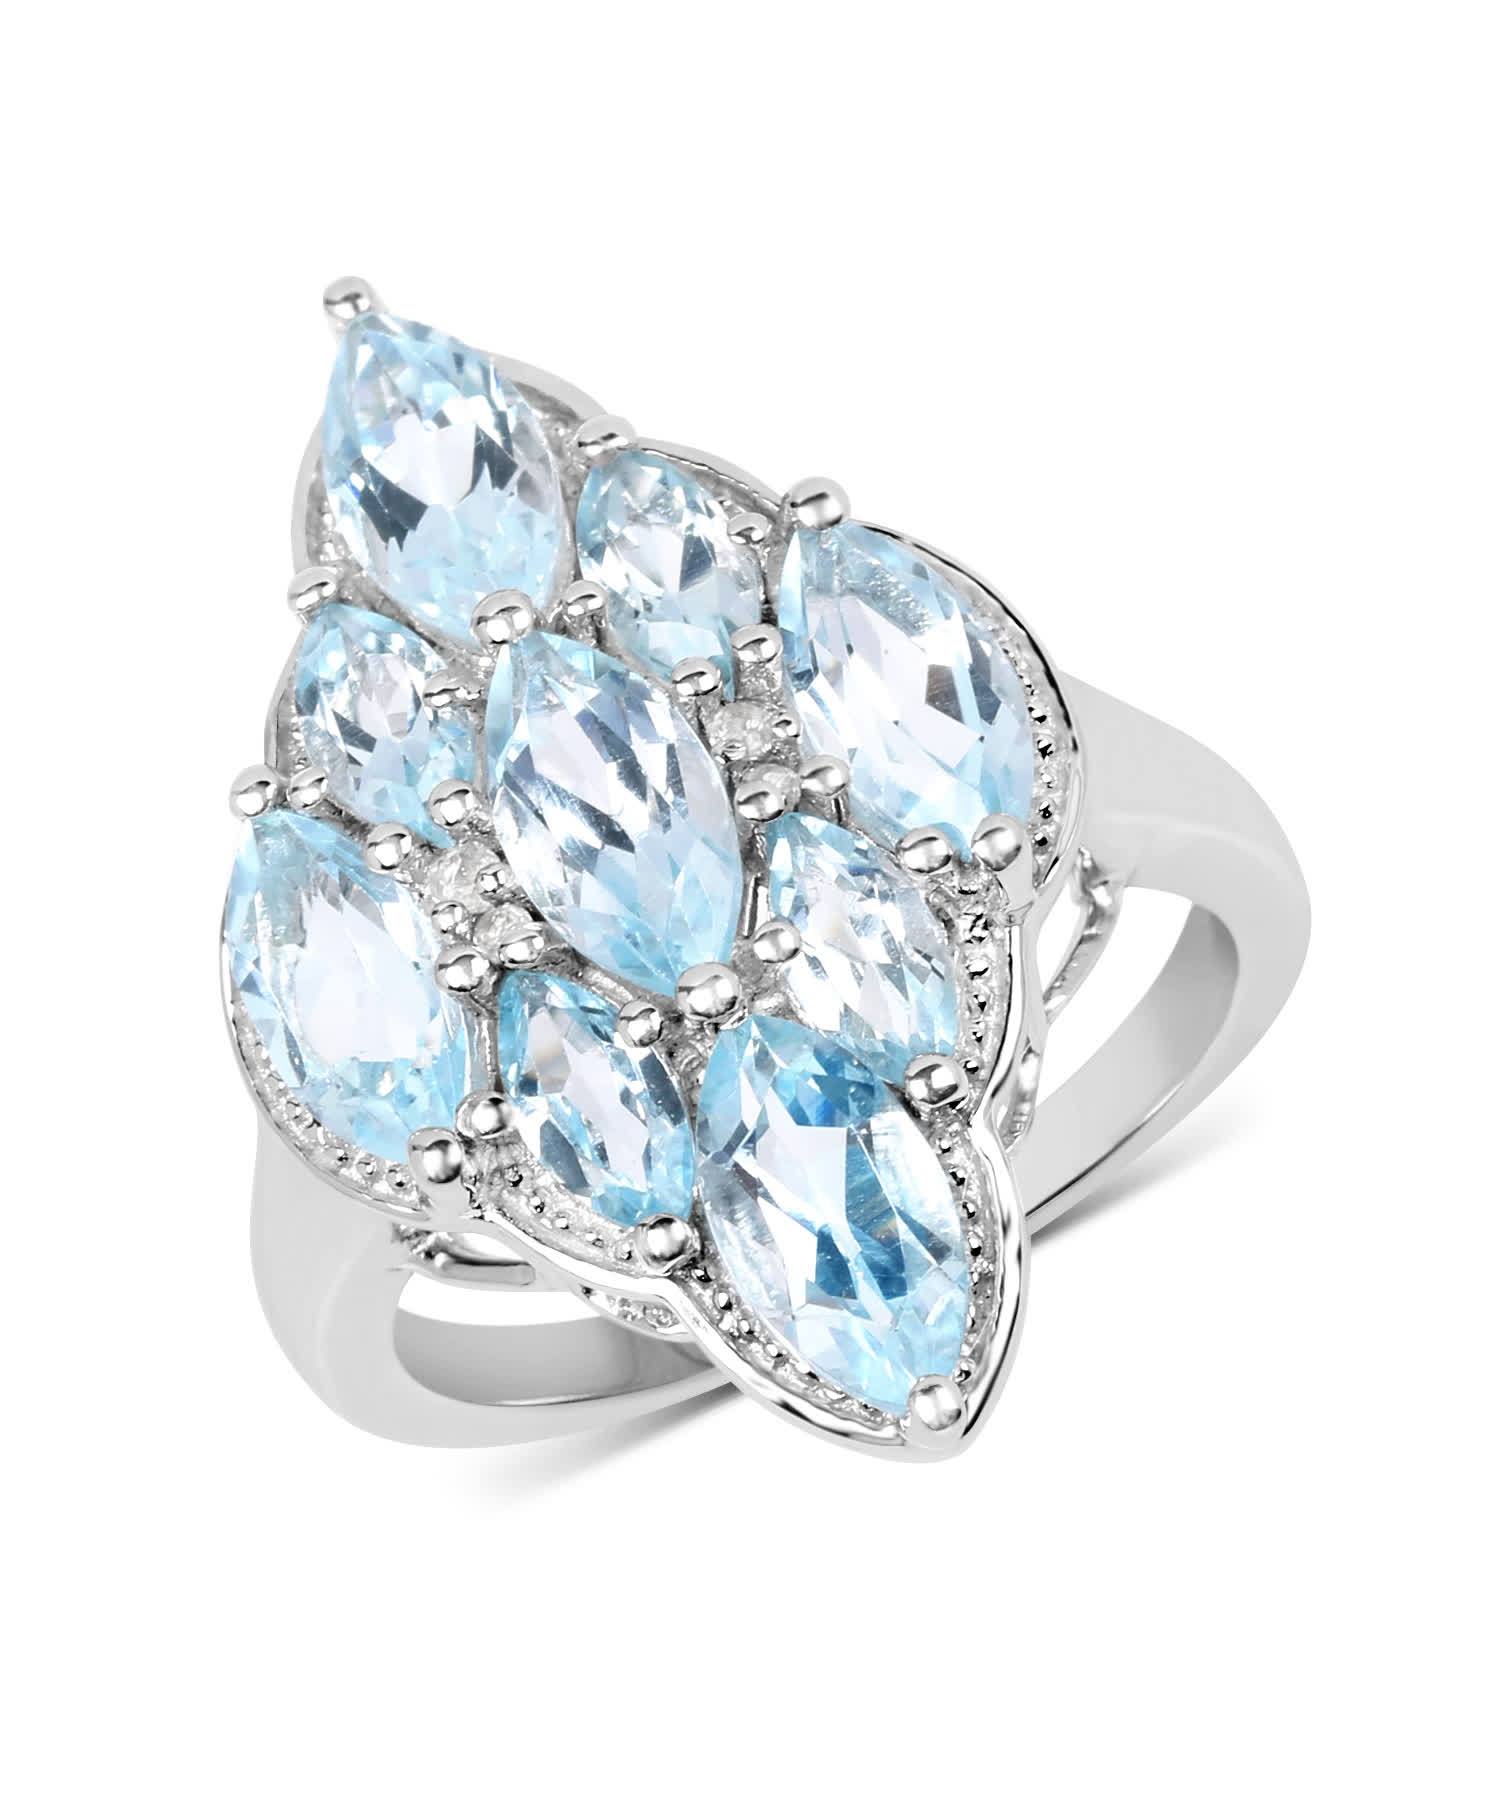 4.30ctw Natural Sky Blue Topaz Rhodium Plated 925 Sterling Silver Fashion Ring View 1